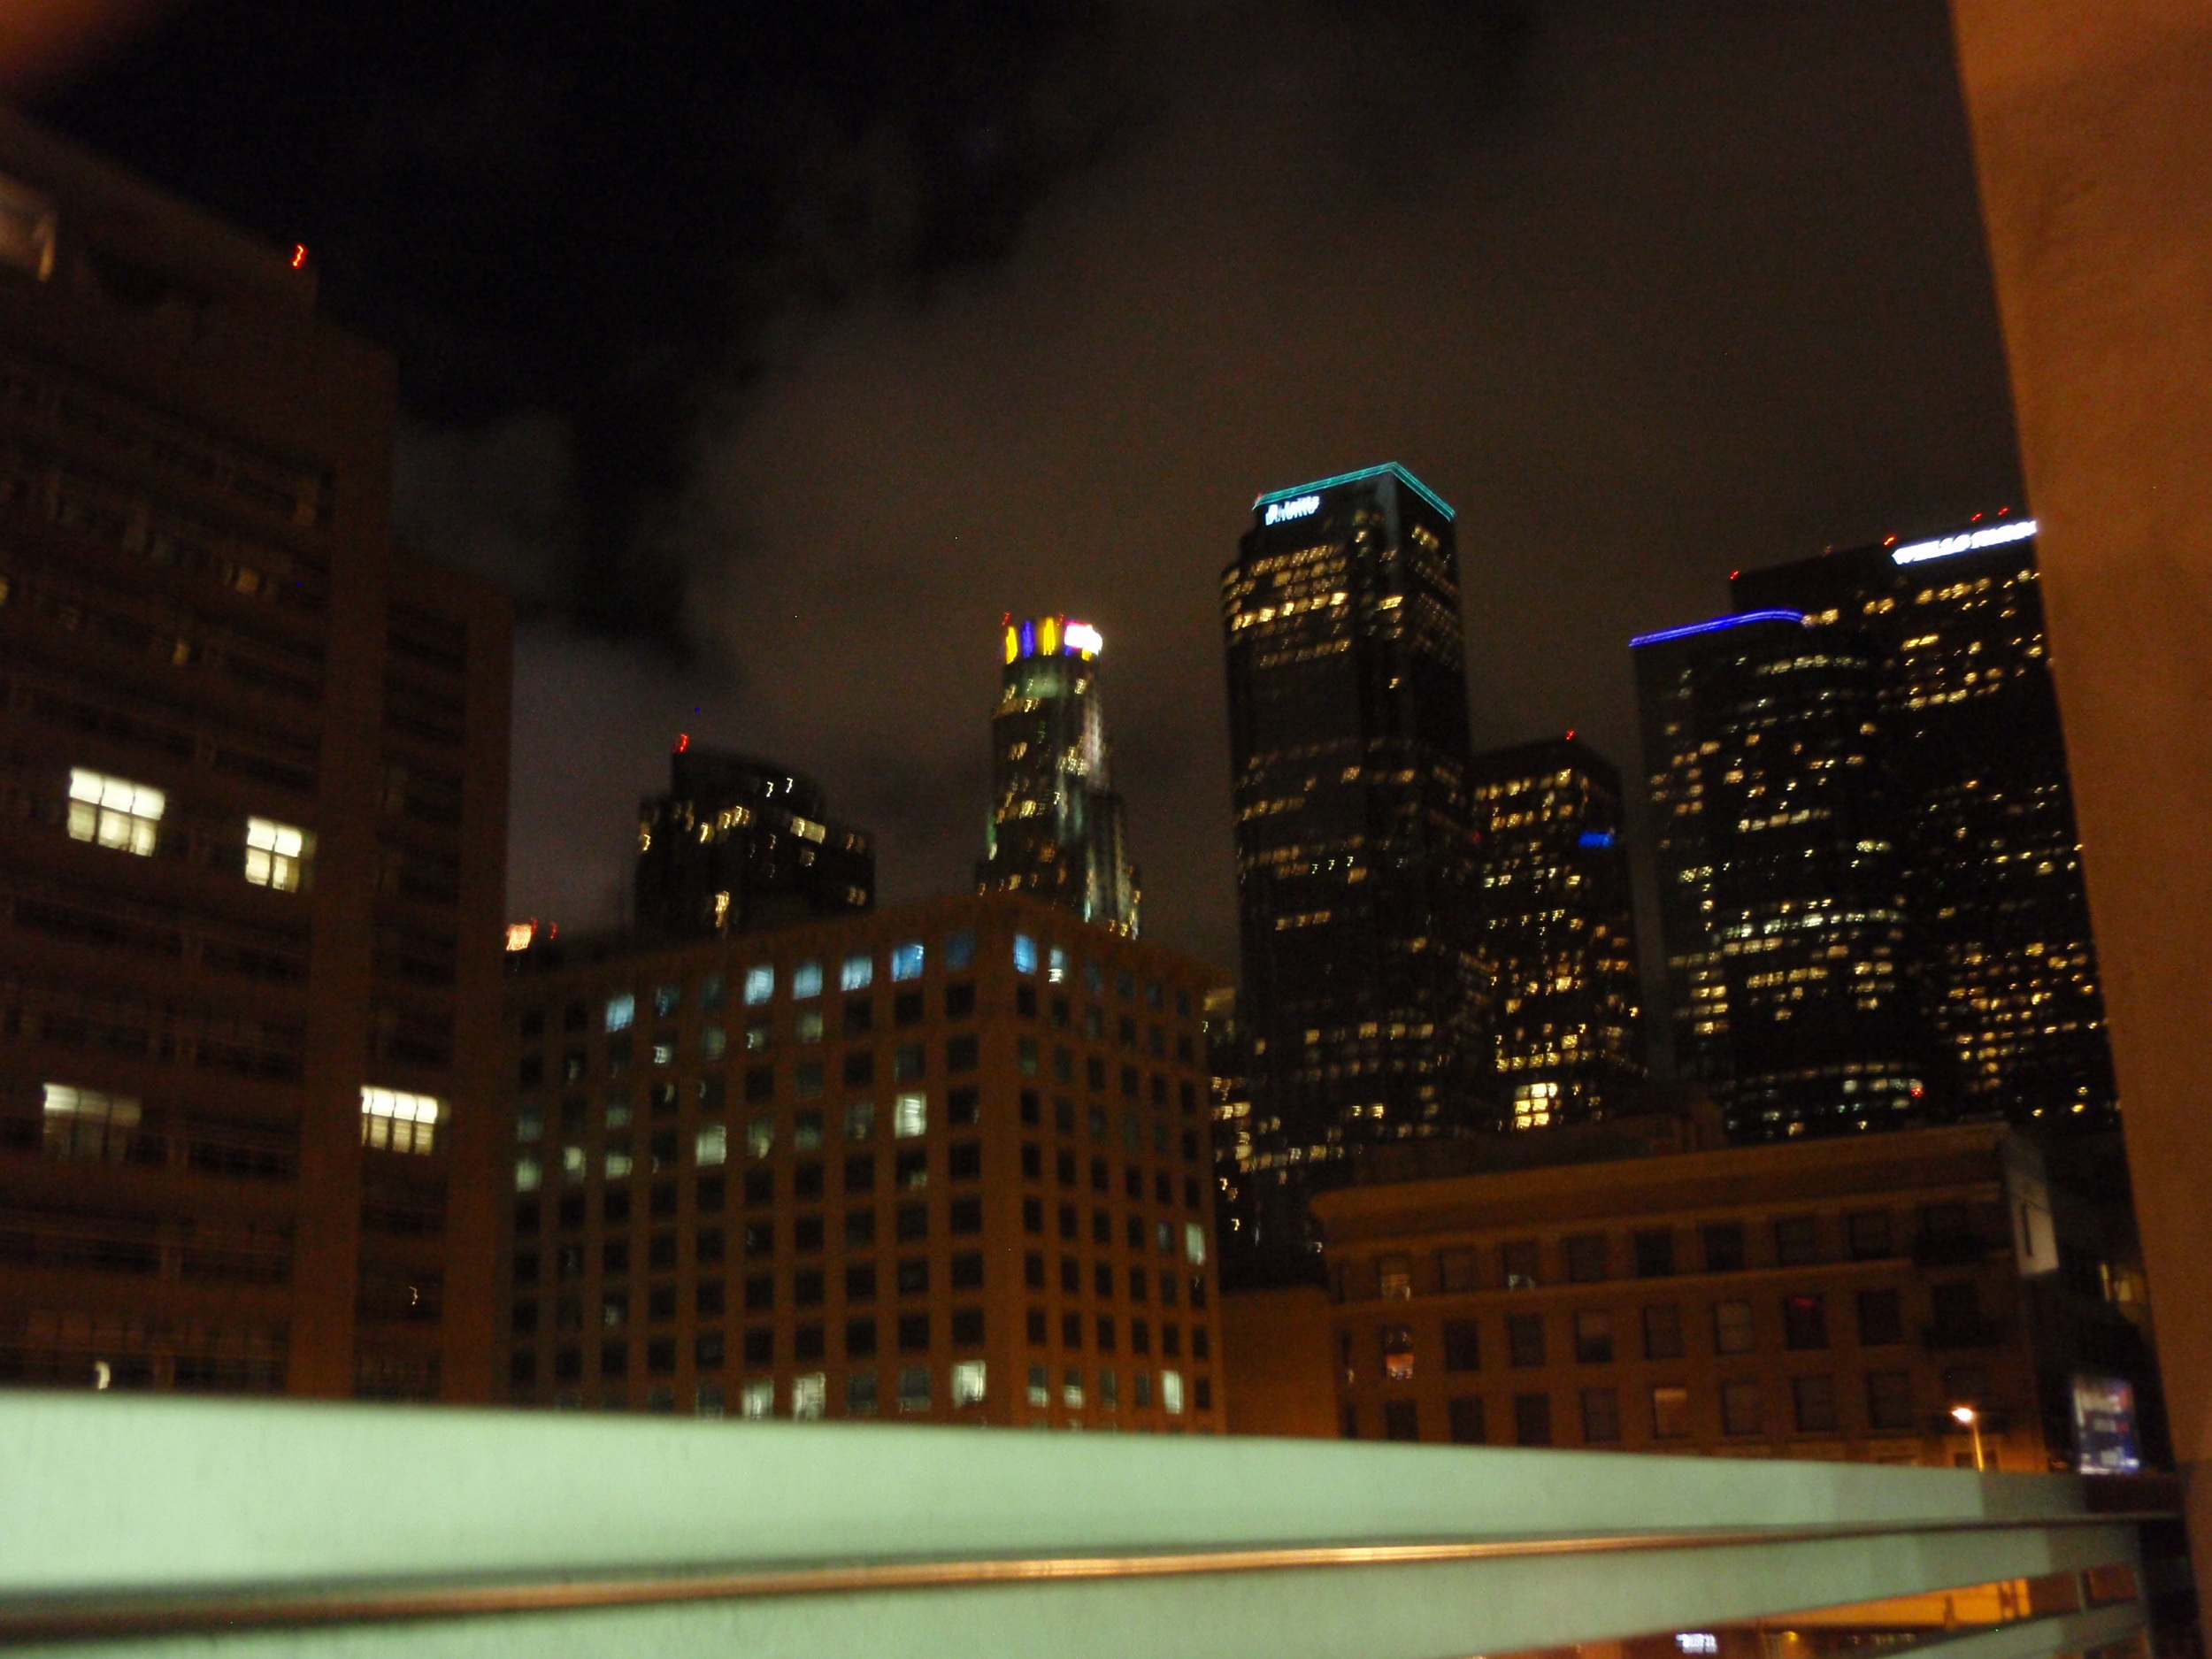 View from the rooftop - US Bank has Laker colors shining bright